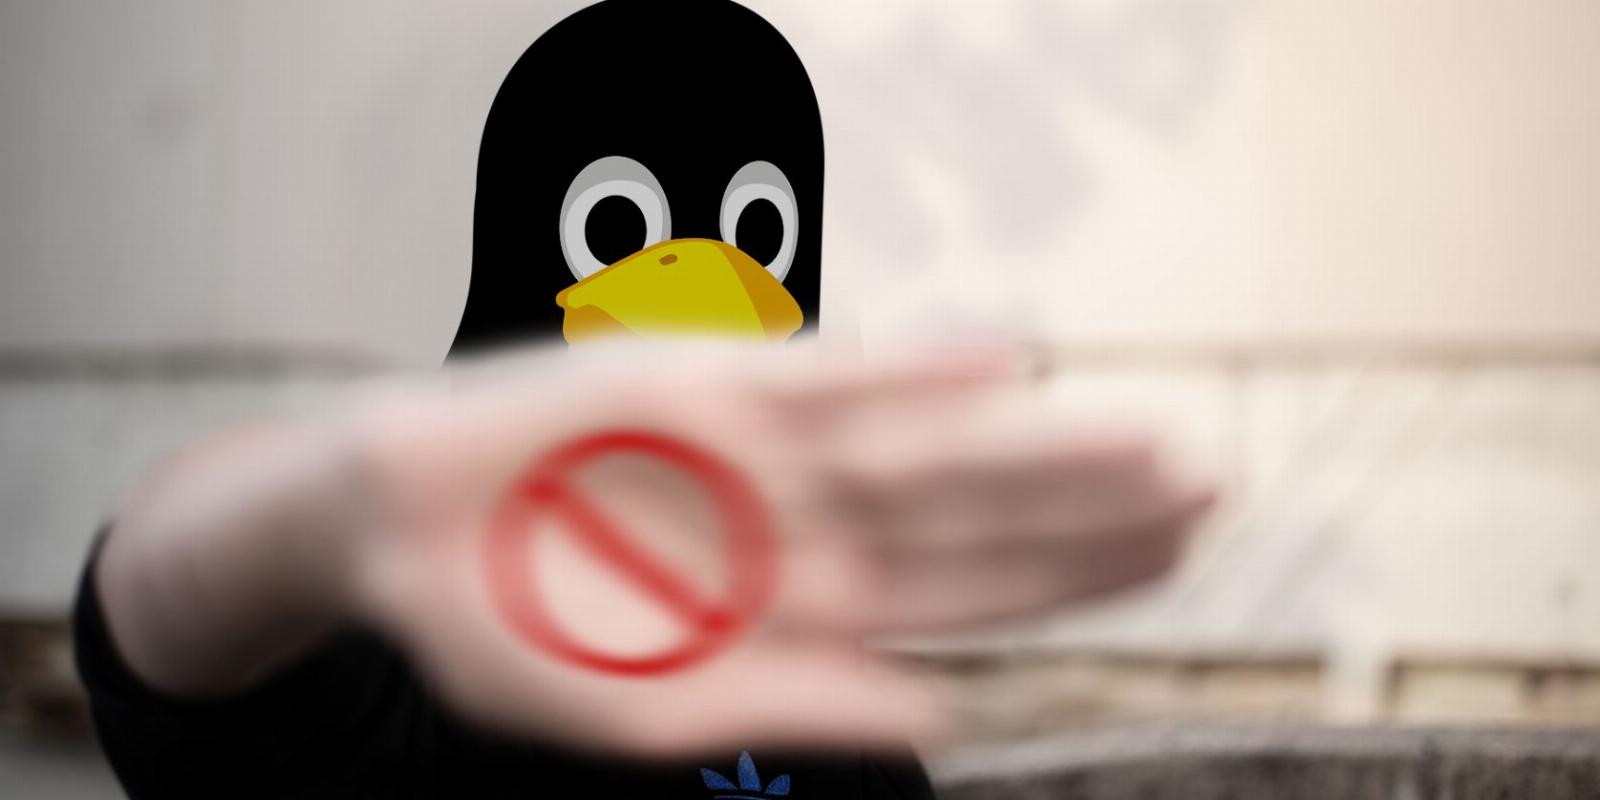 8 Things You Should Never Do After Installing Linux